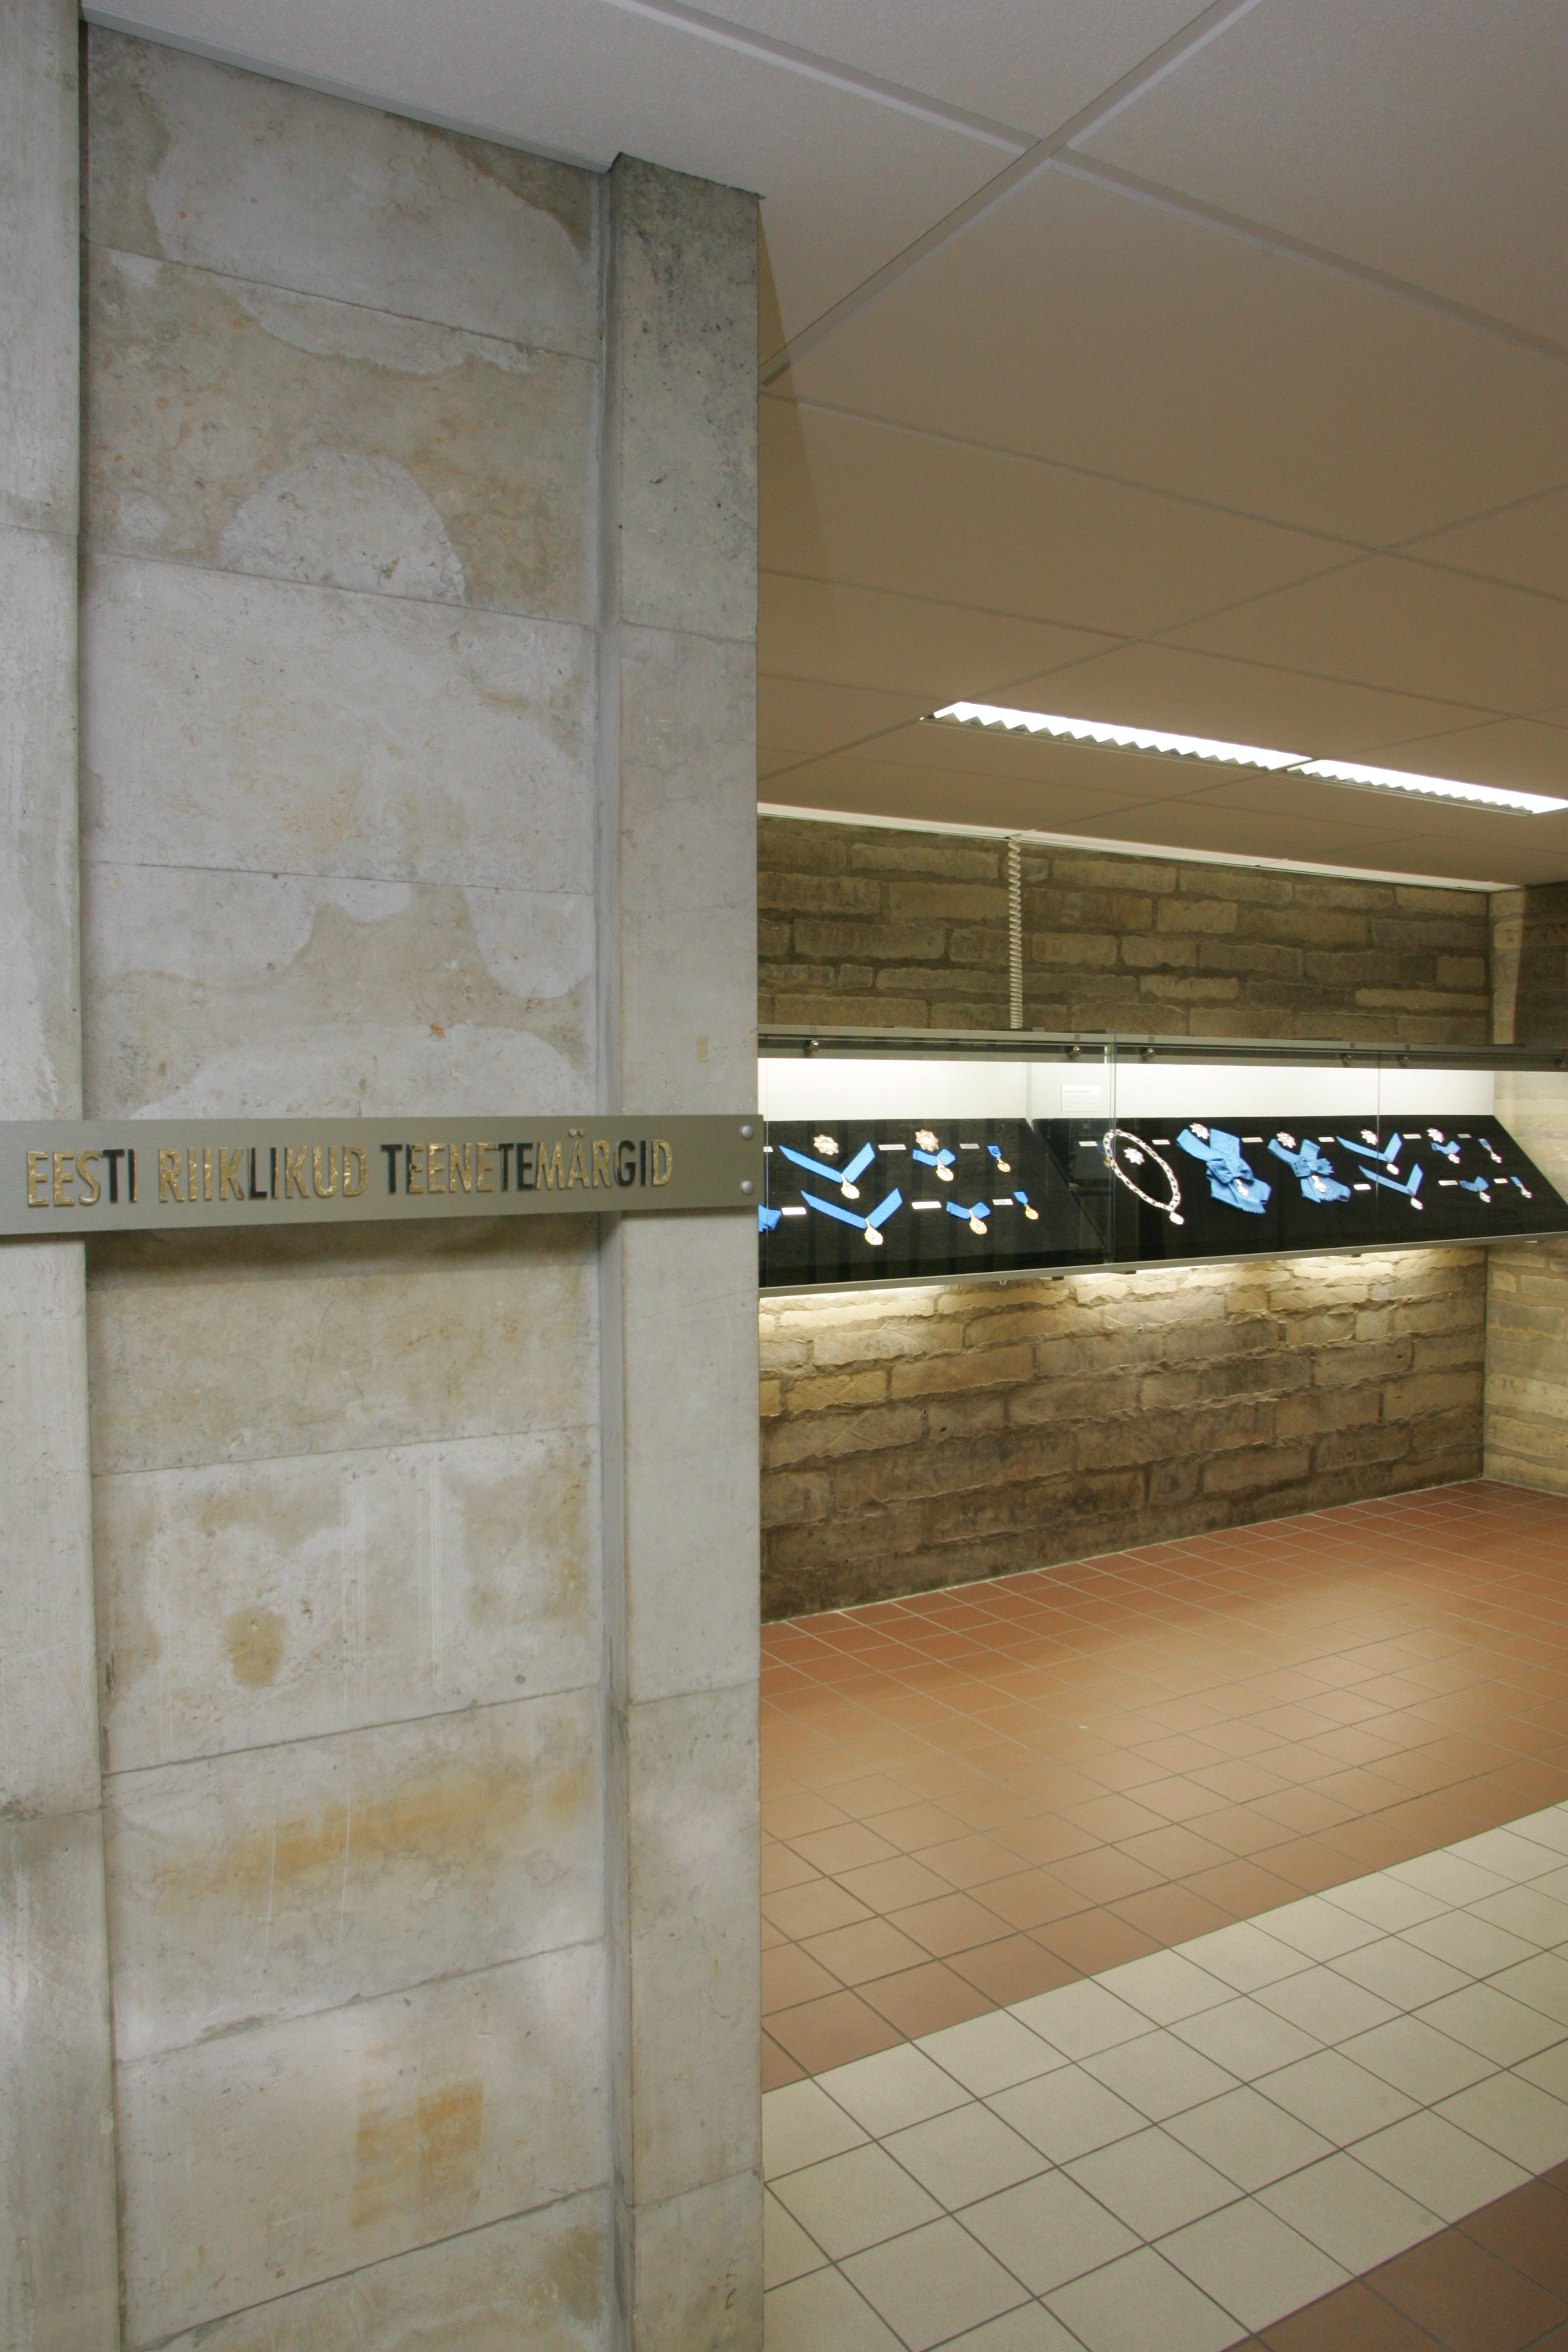 The exhibition of the National Library of the State Treasures